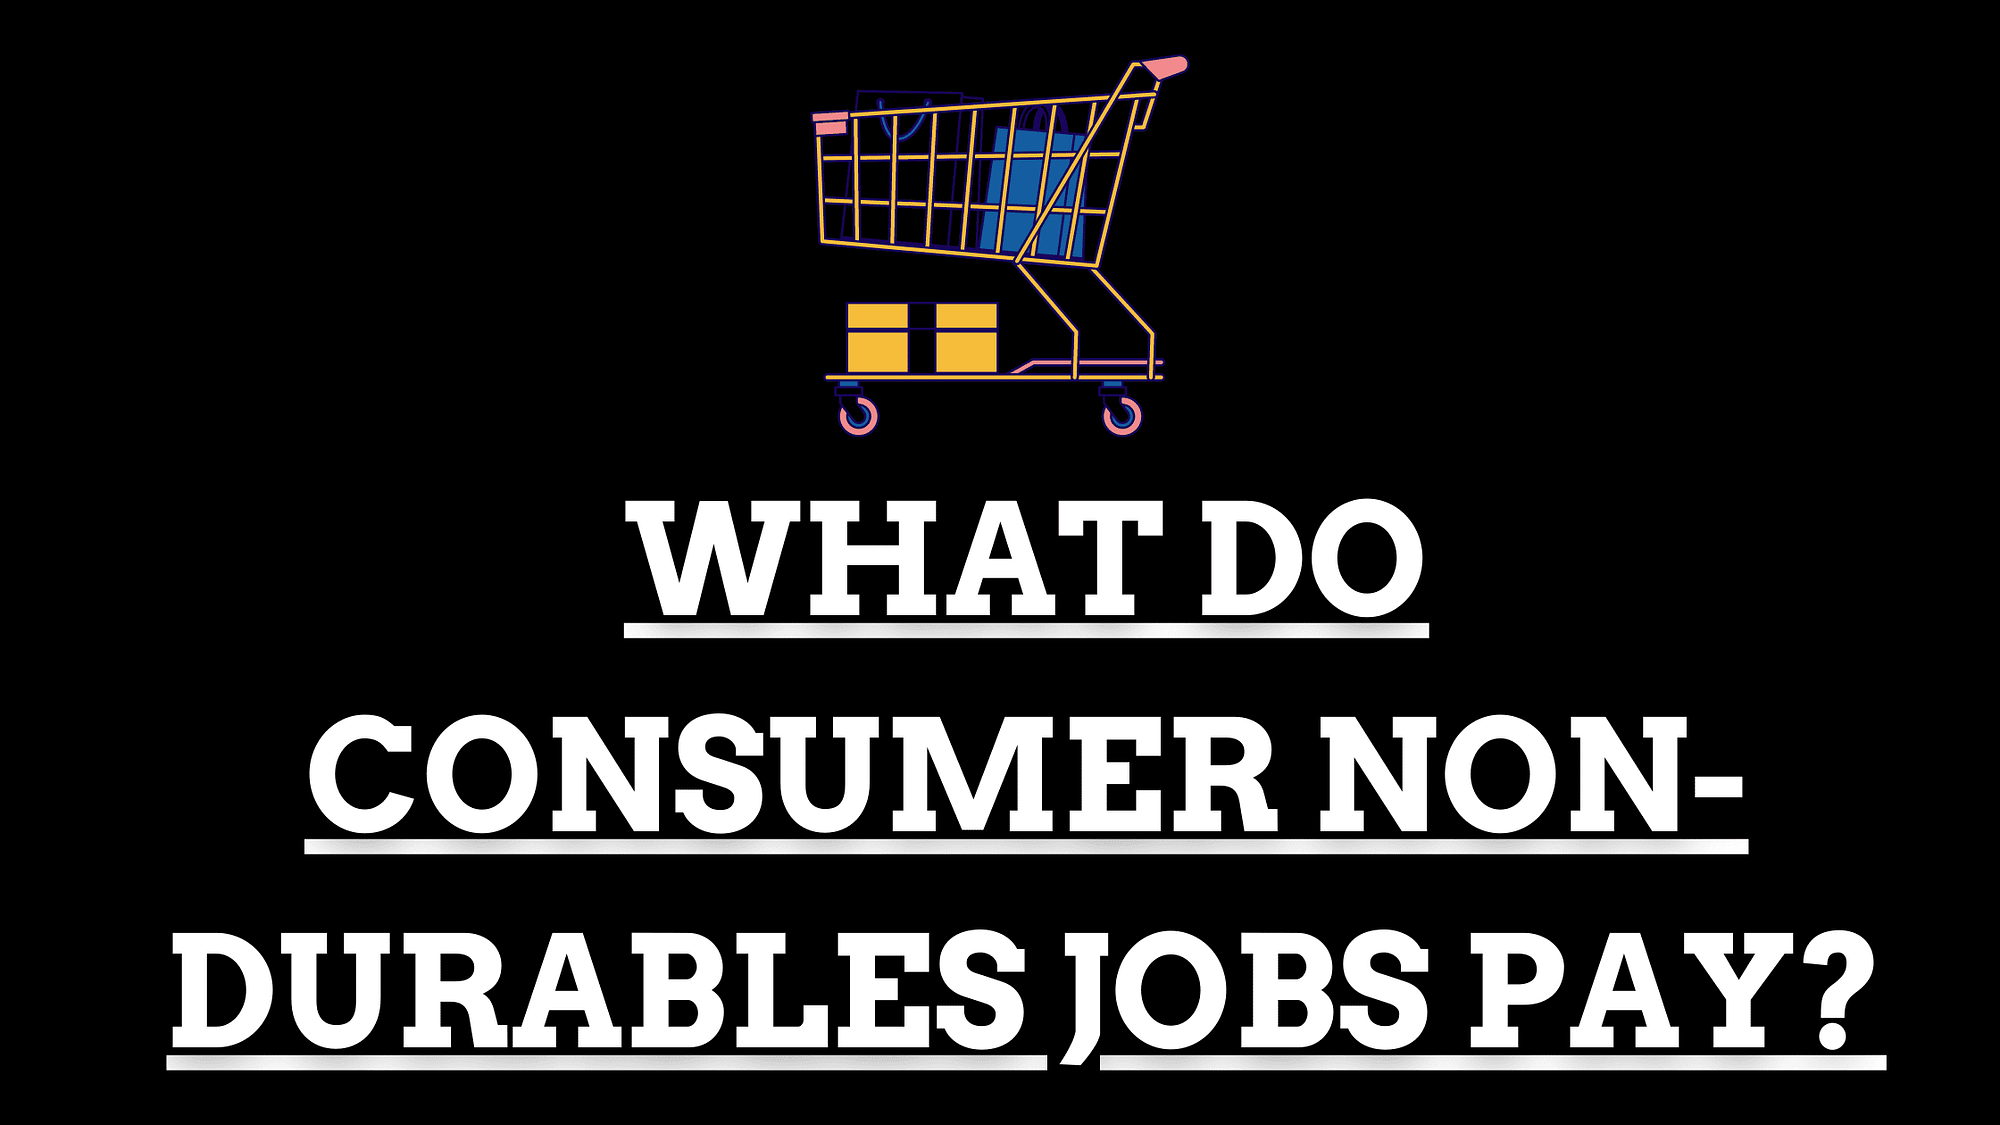 You are currently viewing what do consumer non-durables jobs pay?